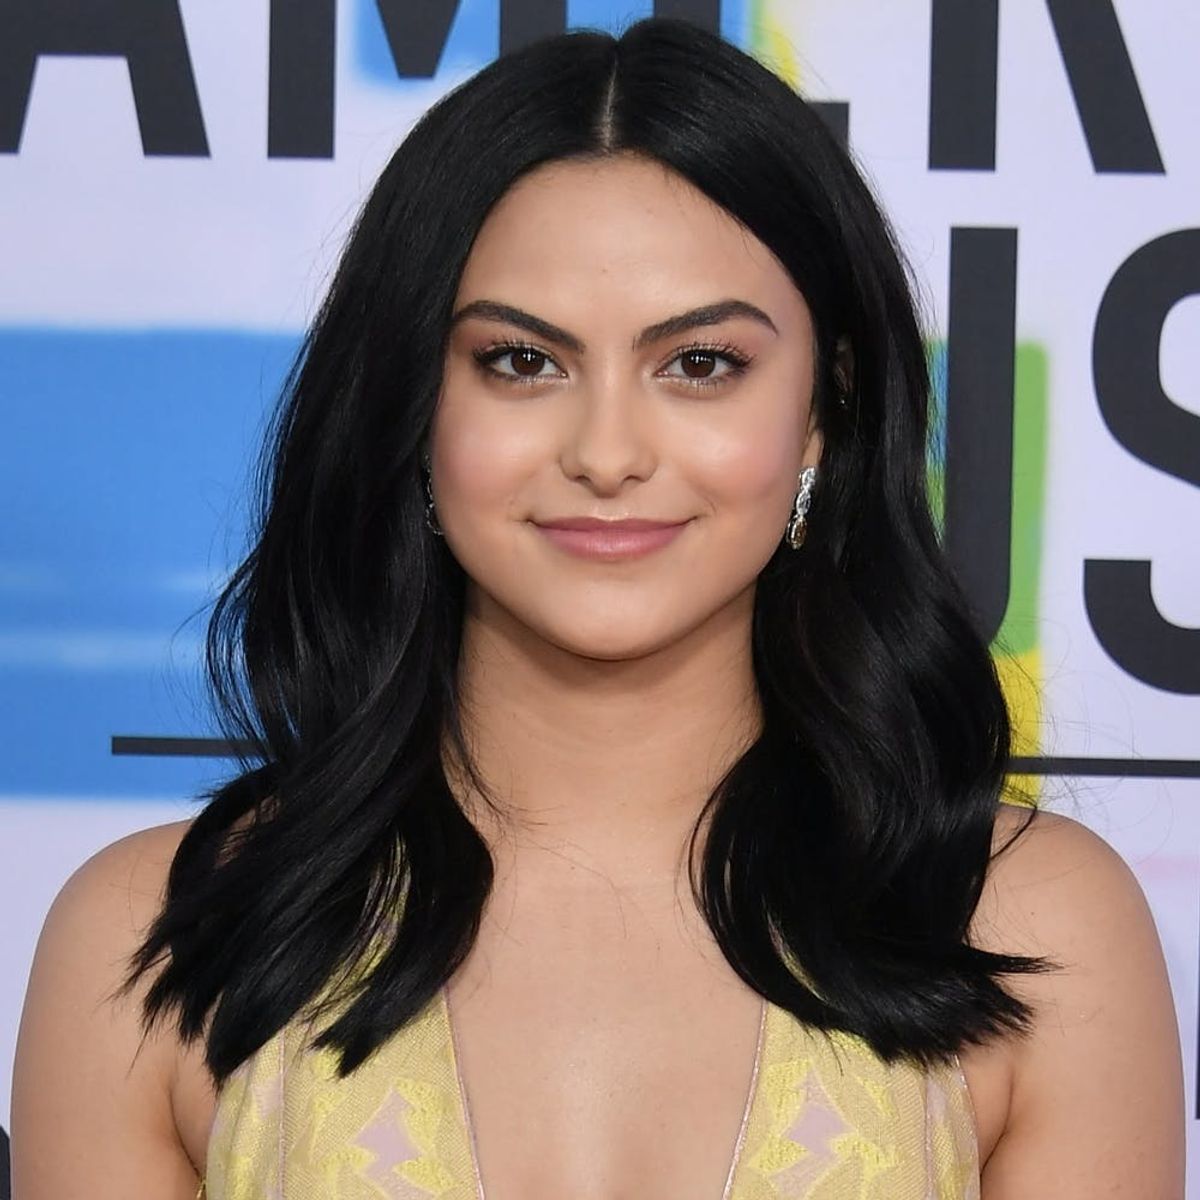 Riverdale’s Camila Mendes Says She’s ‘Done With Dieting’ in Powerful Instagram Post